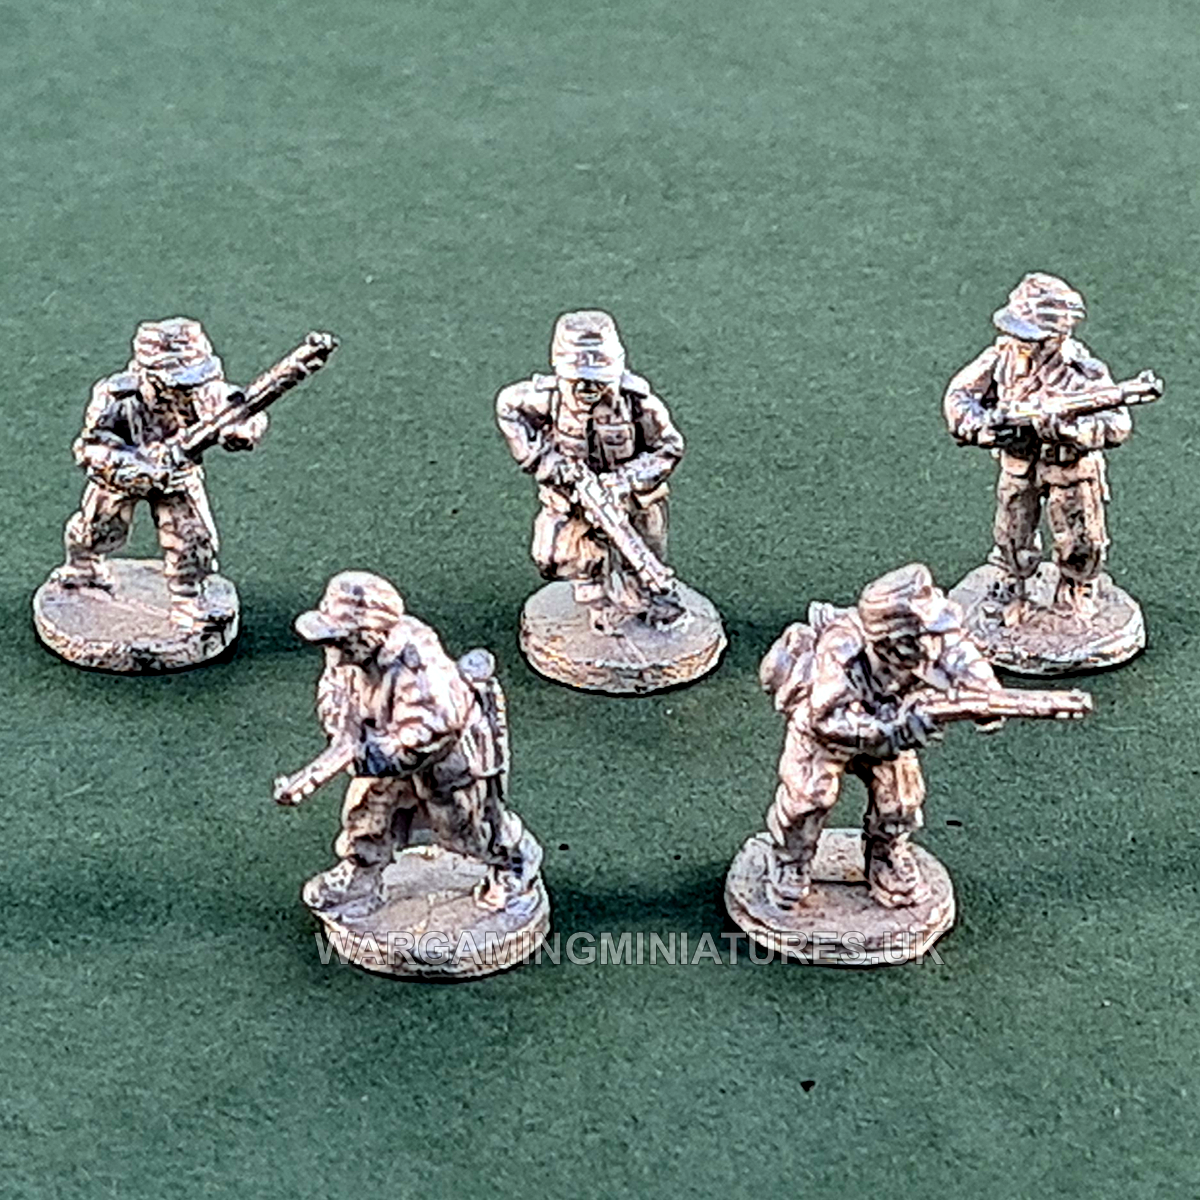 GW01c German Rifle Pack 3 with Field Caps unpainted